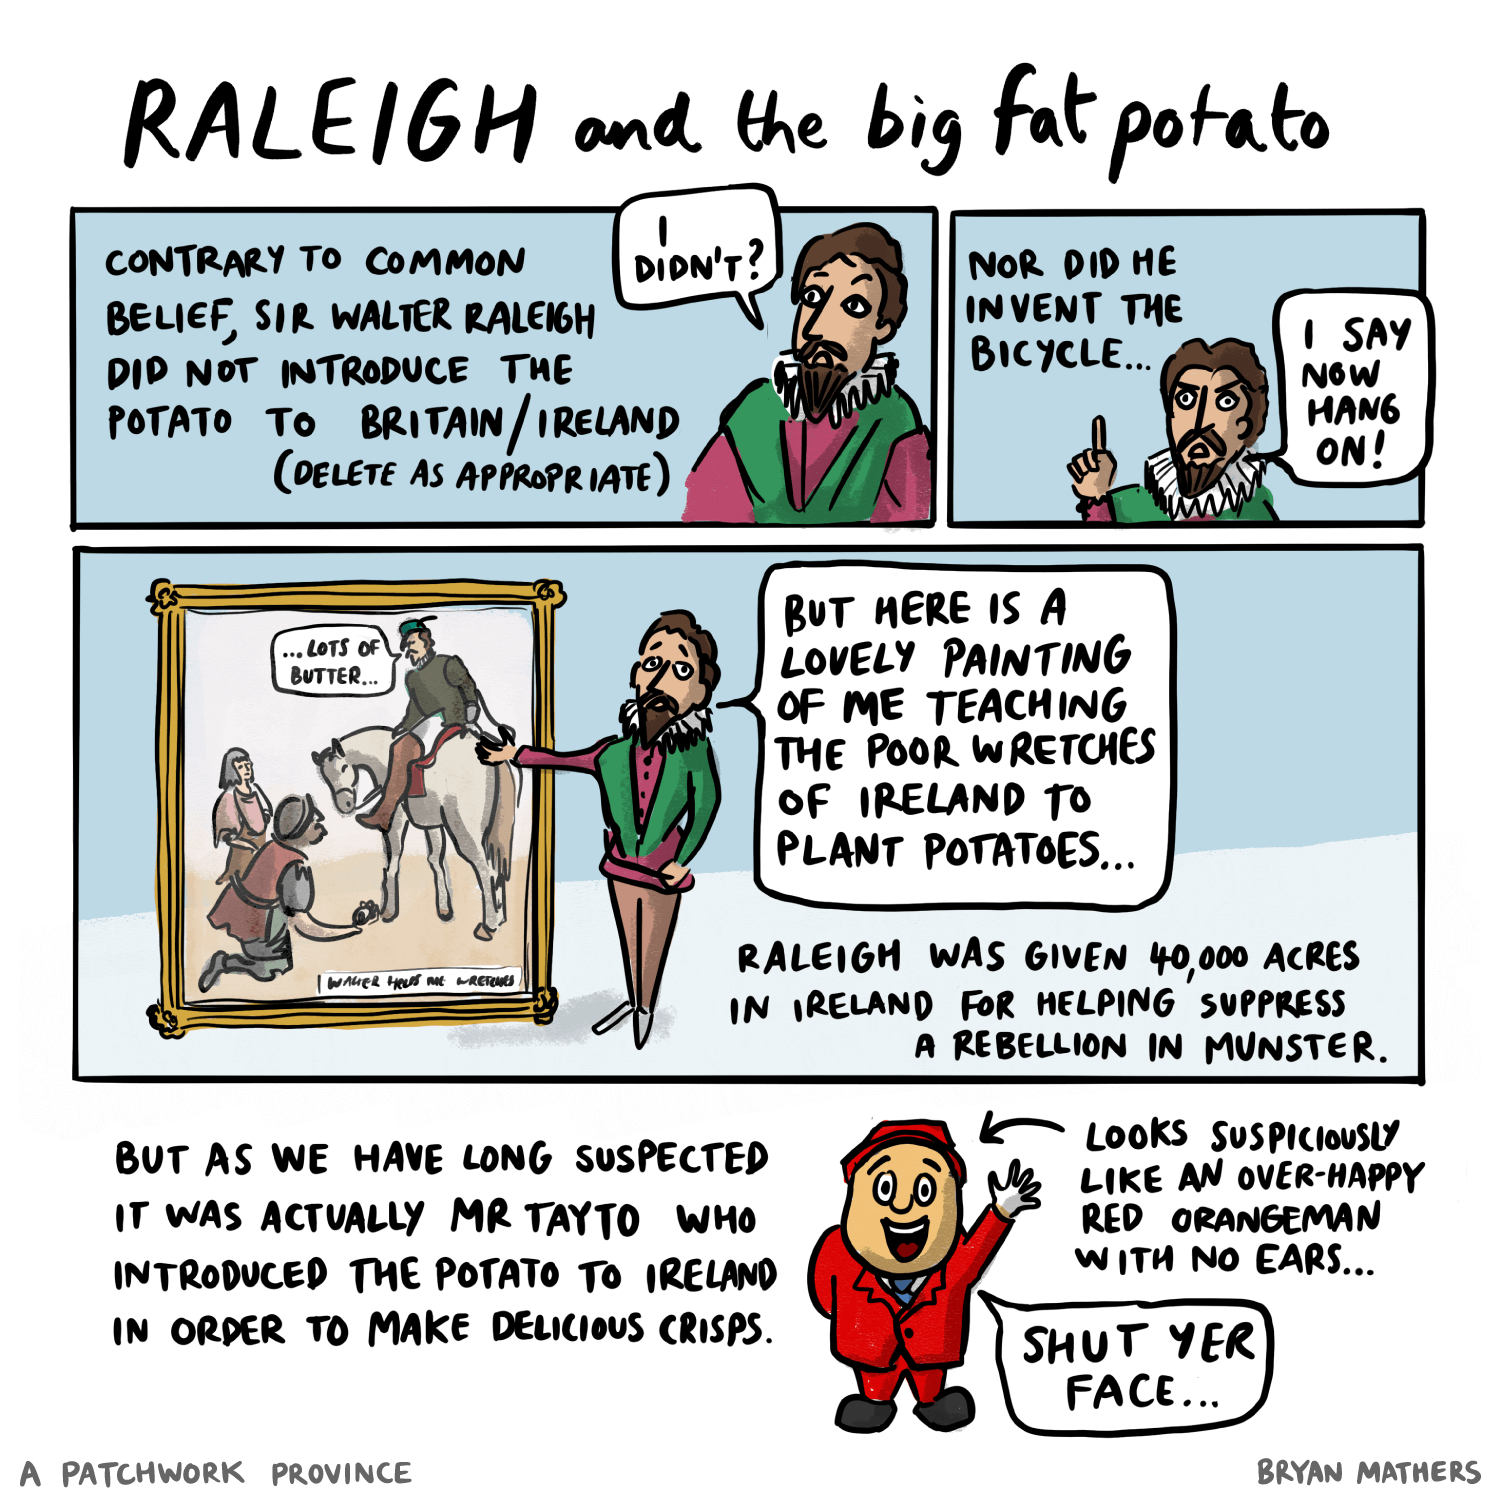 Raleigh and the big fat potato